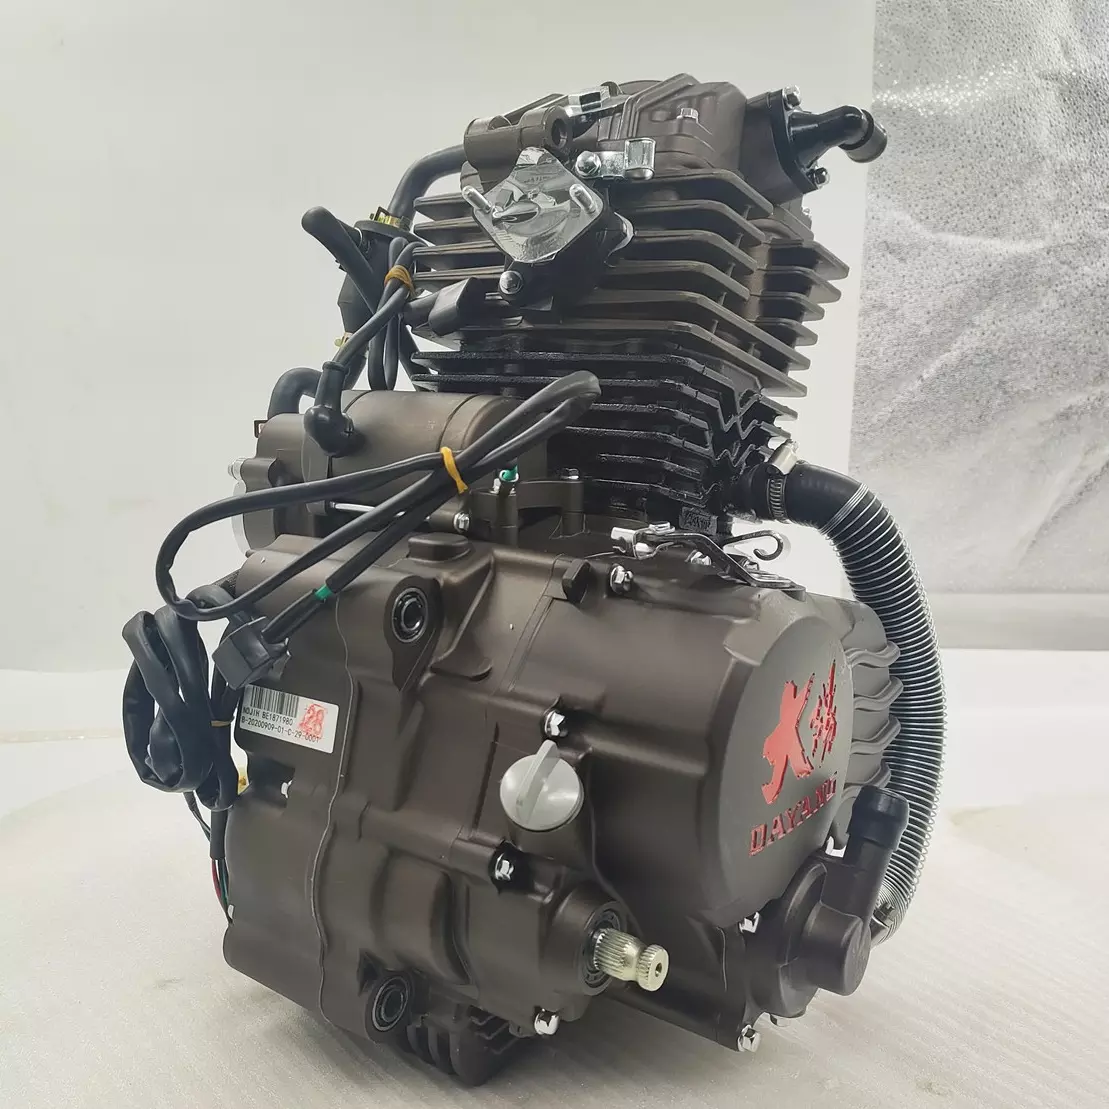 DAYANG 250cc Motorcycle Engine Single Cylinder 4 Stroke Style Wolf water-cooled Method Origin Ignition CDI Start Place Kick